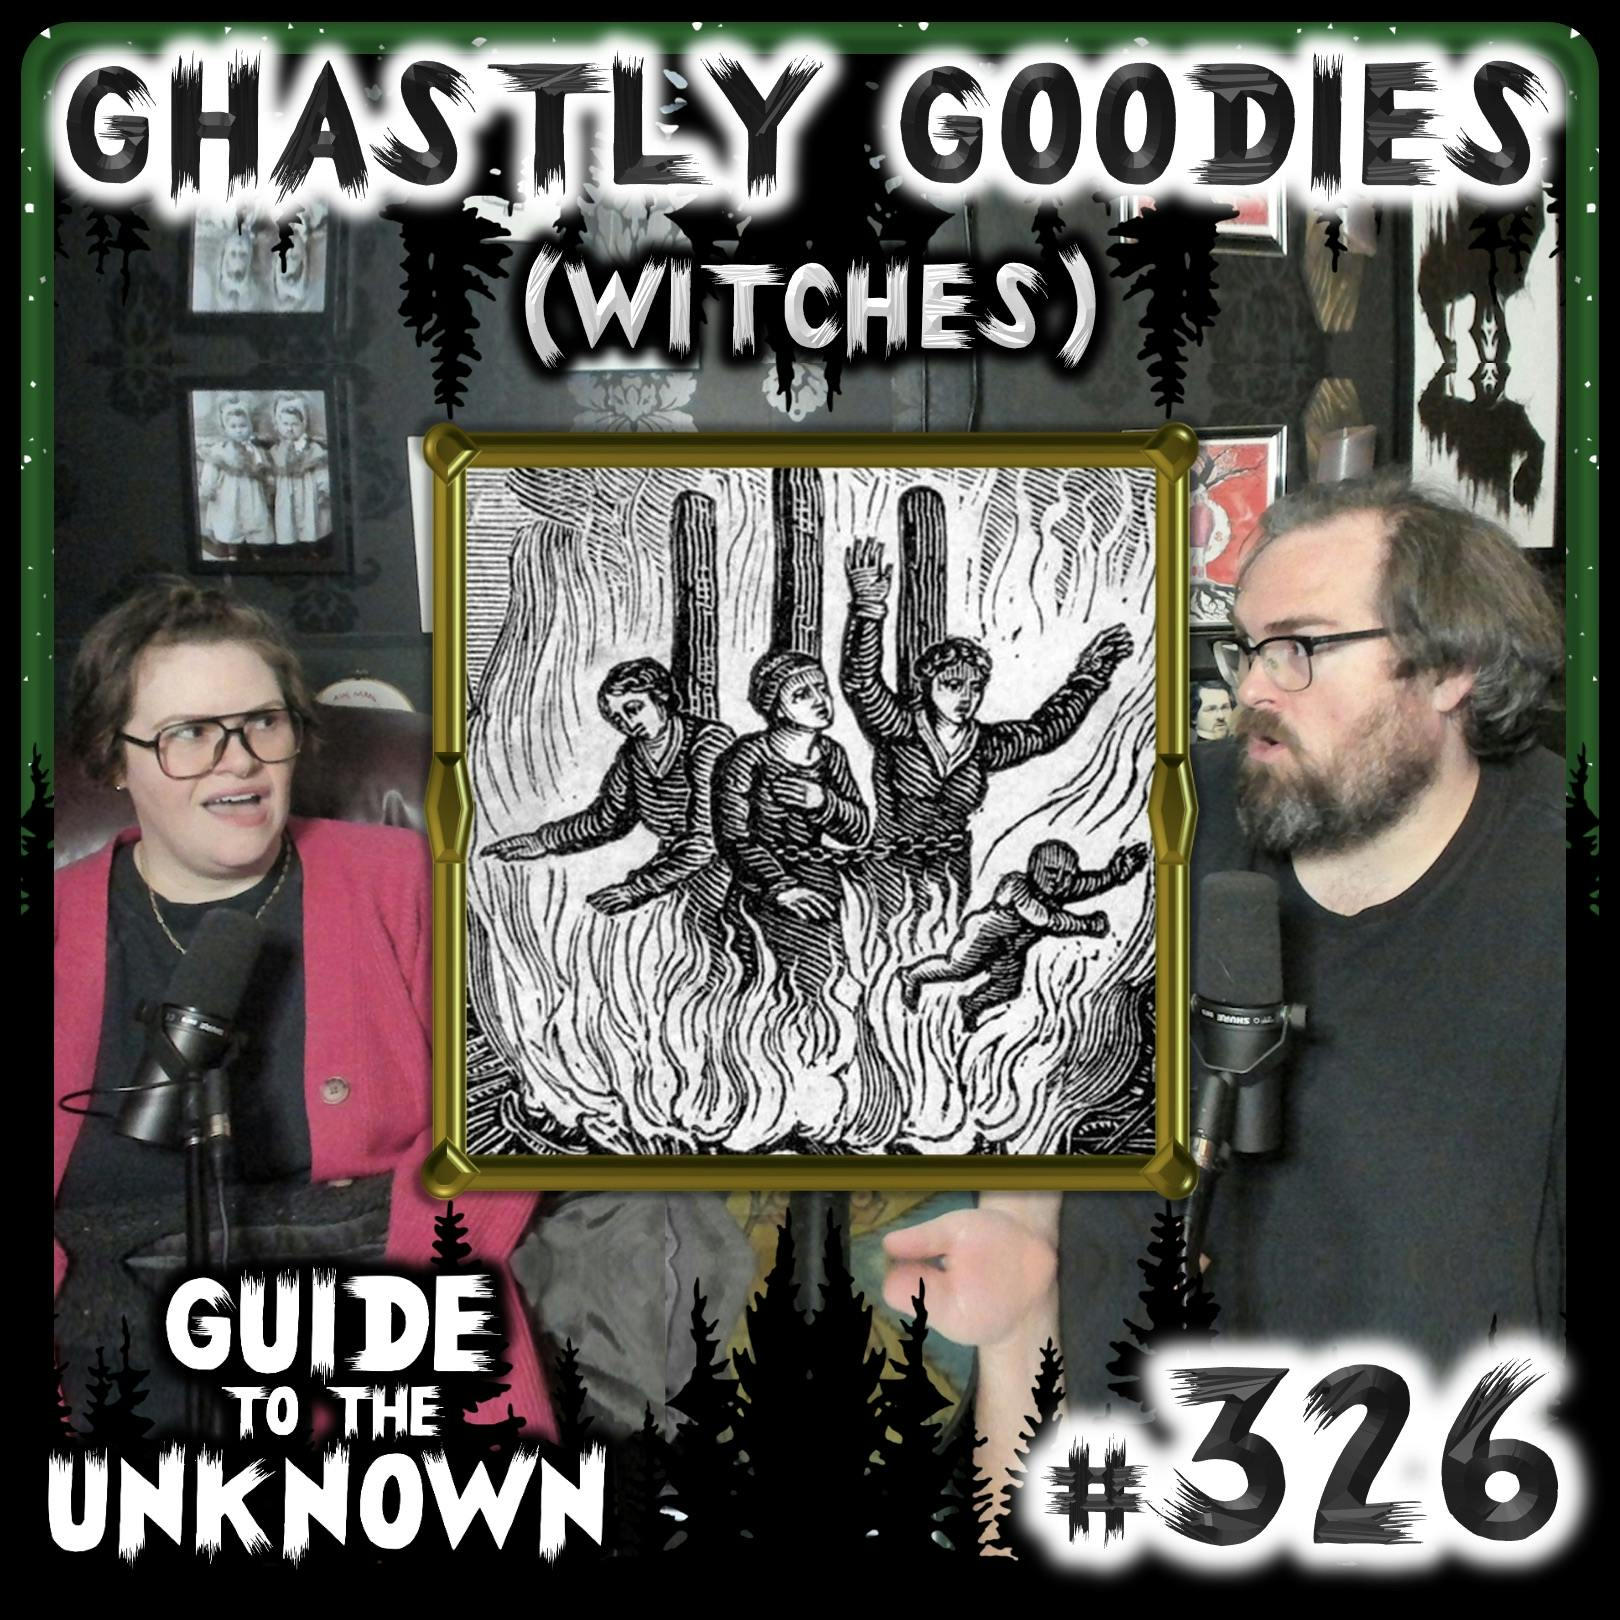 326: Ghastly Goodies (WITCHES)